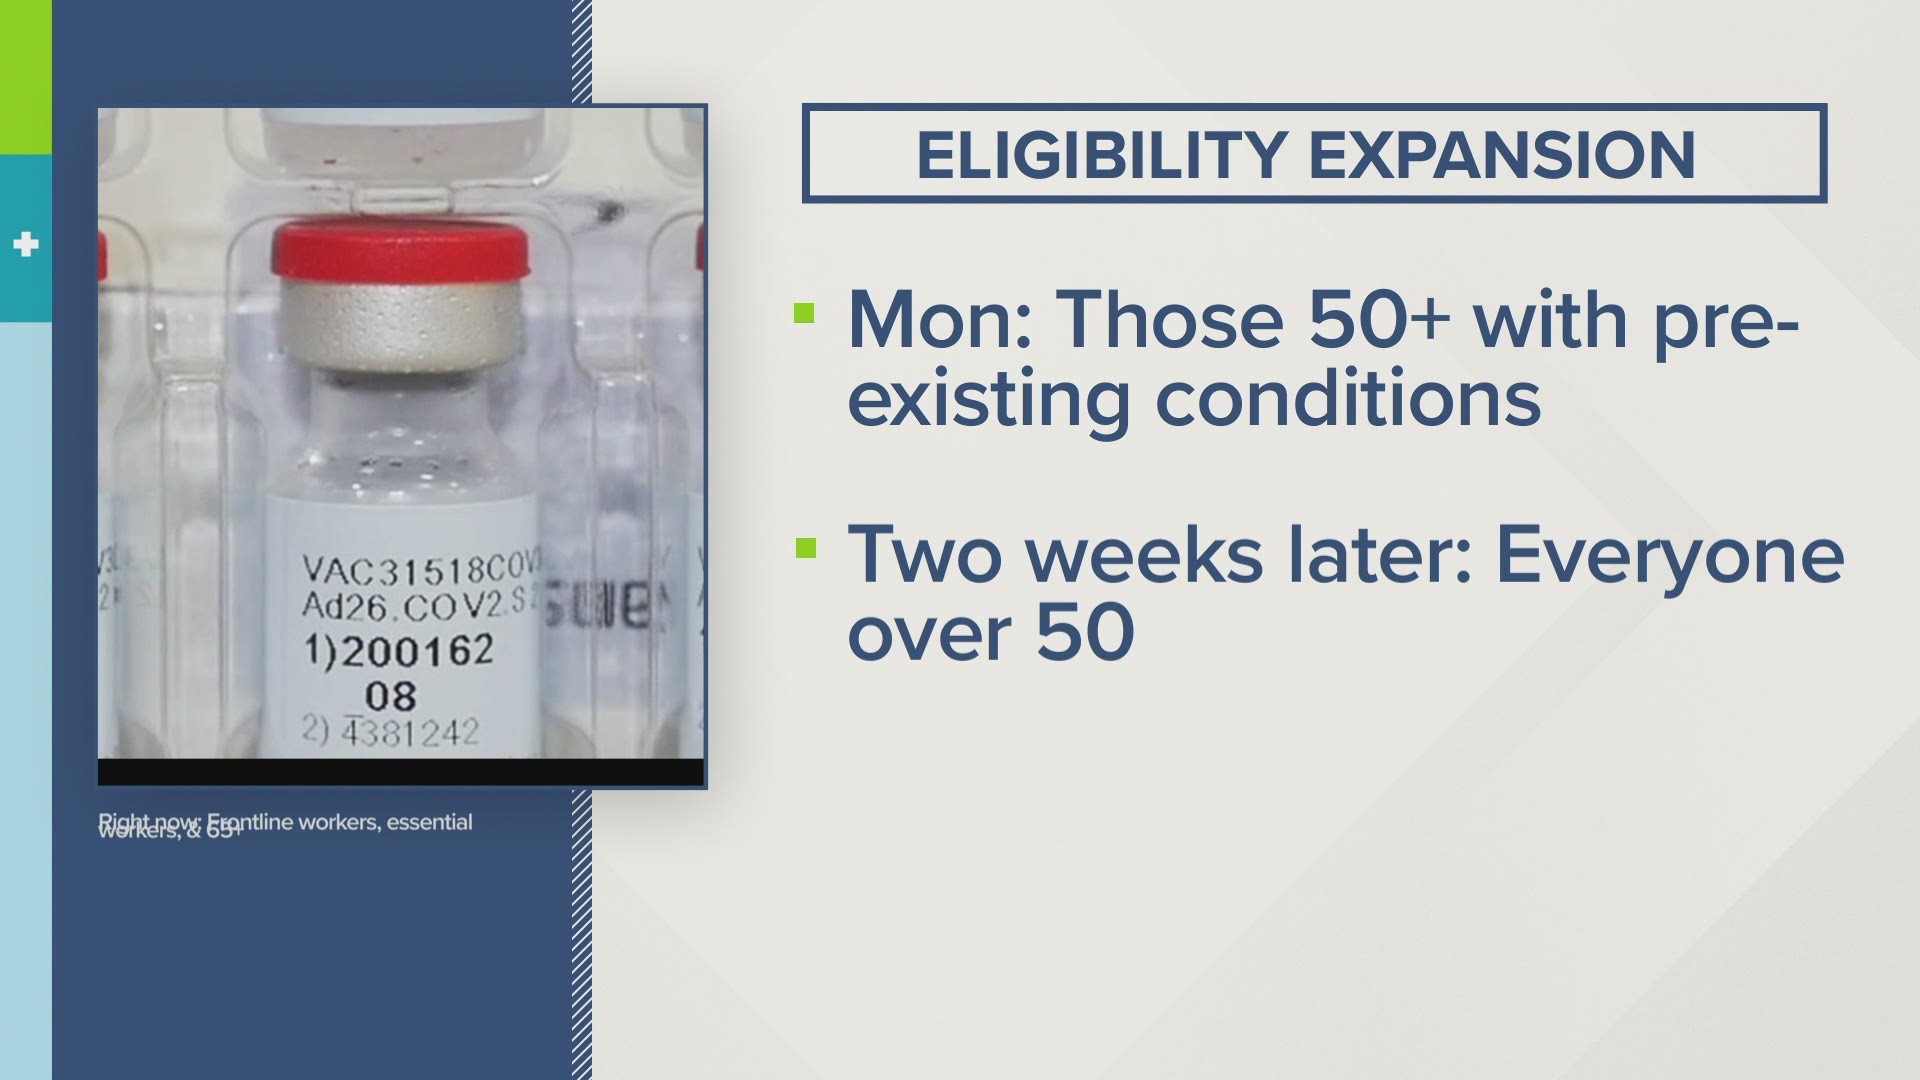 Gov. Gretchen Whitmer said Wednesday people 50 years old or older with  a pre-existing condition will be eligible for the COVID-19 vaccine starting Monday, March 8.